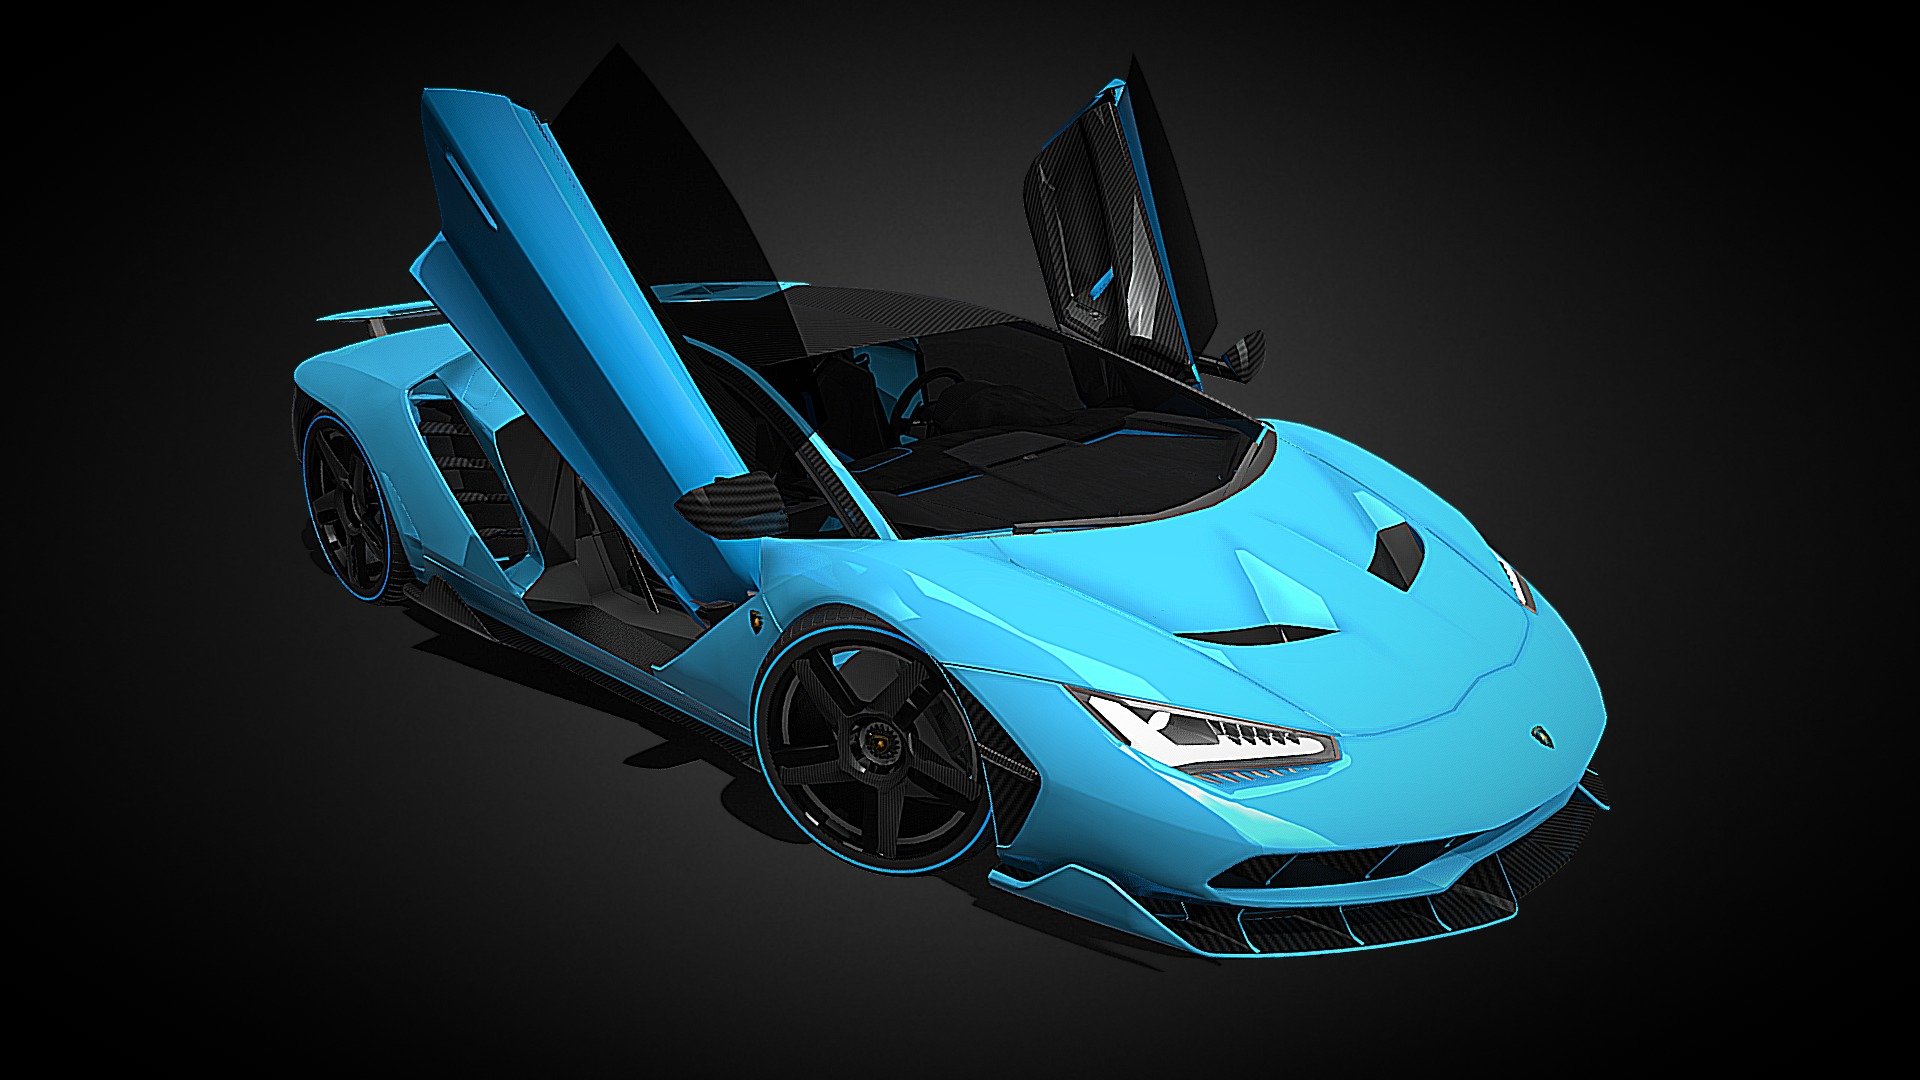 “THIS WAS THE MOMENT I FINALLY DECIDED TO CREATE A PERFECT CAR” 

Ferrucio Lamborghini 

Here is the Lamborghini Centenario, one of the most powerful Lamborghini ever built. It was entirely made of carbon fiber worked by hand, in addition it has a 6.5L V12 of 770 horsepower.

It was present at the Geneva Motor Show in 2017, limited to 40 copies, (no need to run, they have already been sold for a very long time) prices start from 3 million dollars …

Blender 2.9 +ANIMATION and TEXTURES 4K + SOUND - Free dowload ; )

NEW VERSION : https://sketchfab.com/3d-models/lamborghini-centenario-roadster-sdc-938d3e3642cf4ea895c62c2a4bf6fc08

NB : the interior may be different from the “real” Centenario. To change the color of the interior you just need to change the color of the textures.

Do not hesitate to subscribe! For more models, click here: (all is free!) :

https://sketchfab.com/3Duae - Lamborghini Centenario LP-770 Baby Blue SDC - Download Free 3D model by SDC PERFORMANCE™️ (@3Duae) 3d model